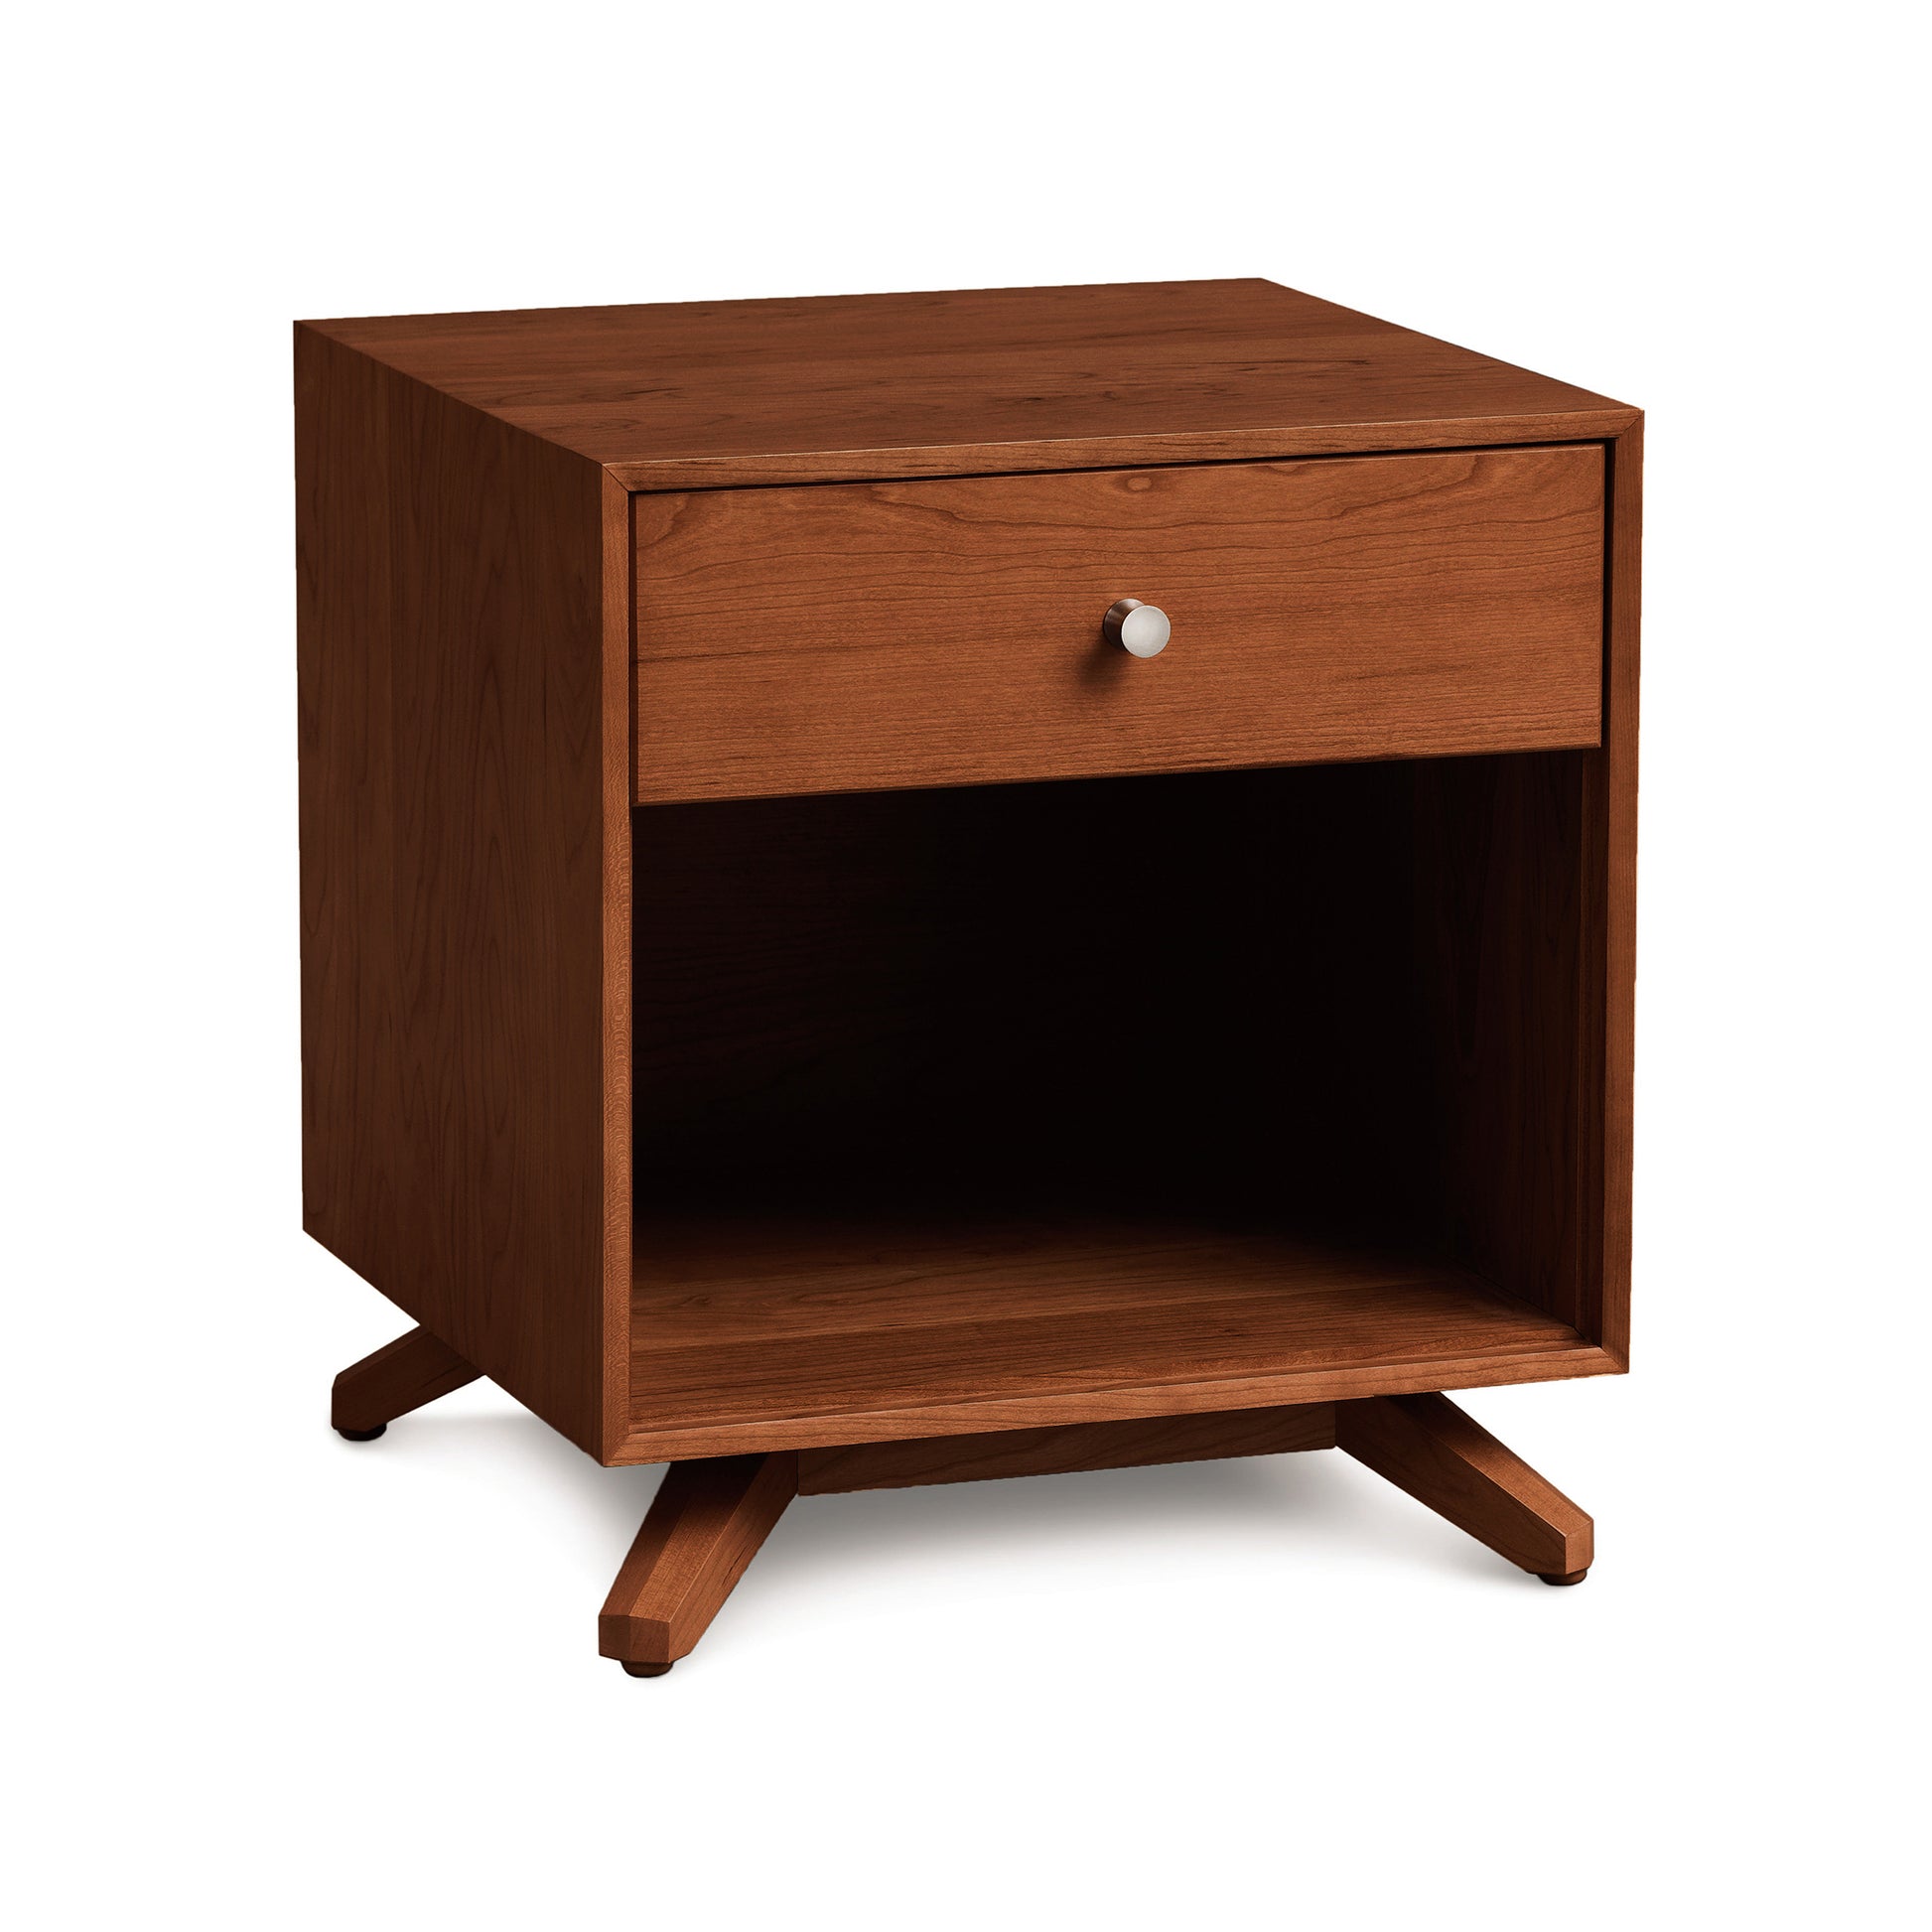 Sustainable hardwood Astrid 1-Drawer Enclosed Shelf Nightstand, by Copeland Furniture, isolated on a white background.